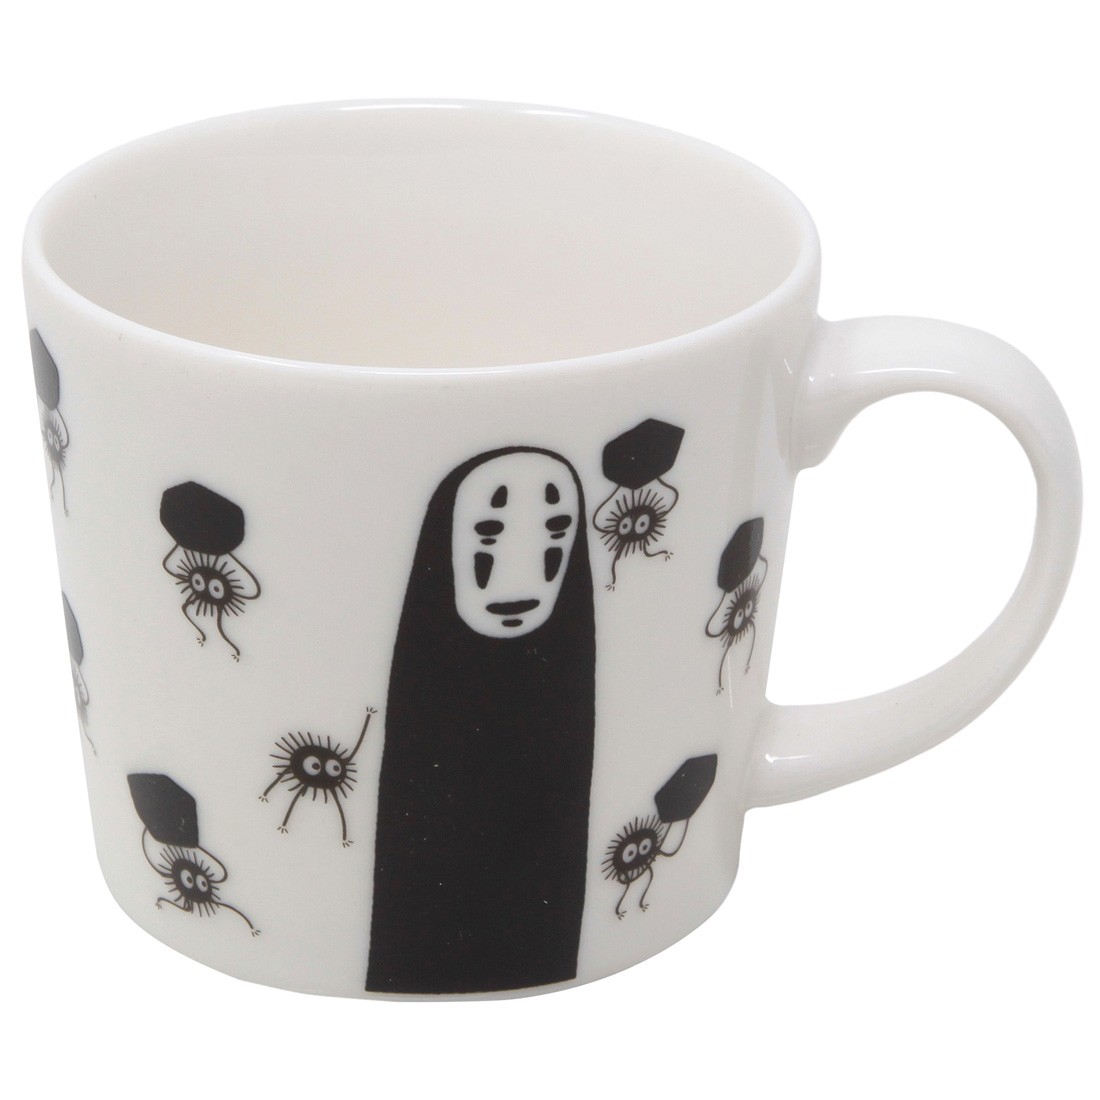 Studio Ghibli Benelic Spirited Away Mysterious Color Changing Teacup Mug With No Face And Soots (white)